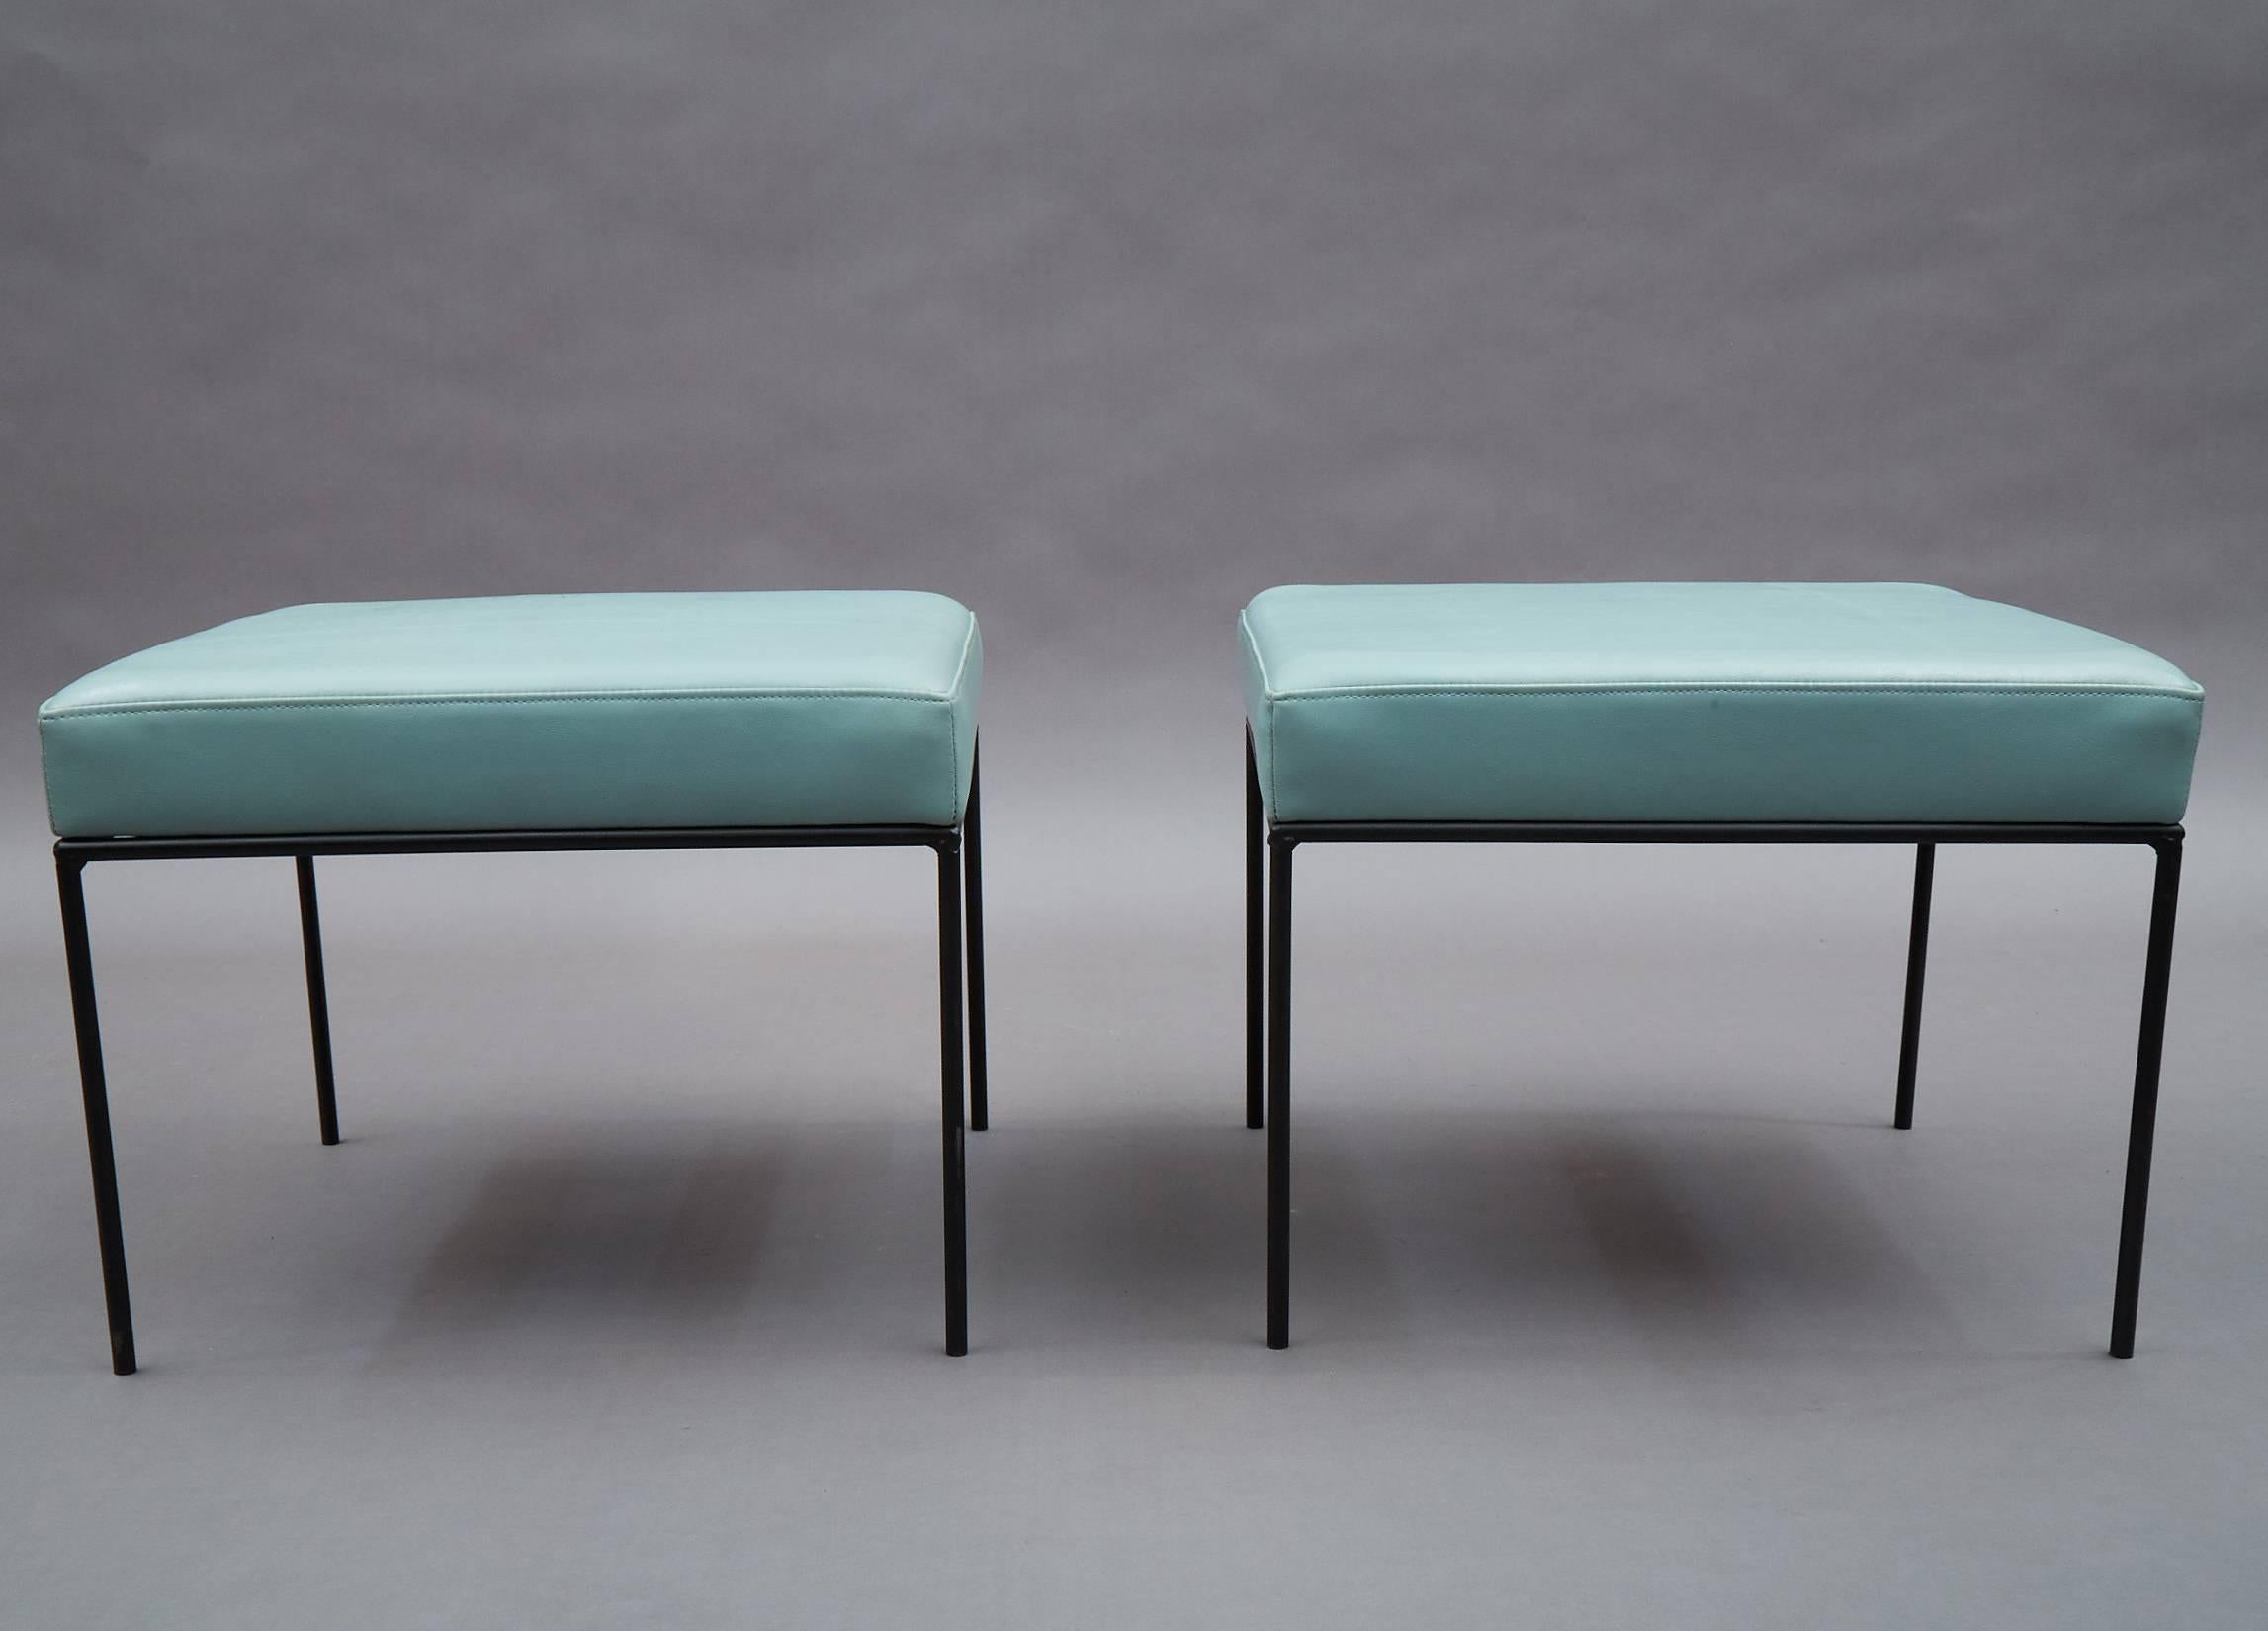 Mid-Century Modern, low-profile, square ottomans/stools/benches by Paul McCobb feature minimal, black wrought iron frames and newly upholstered powder blue vinyl seats.